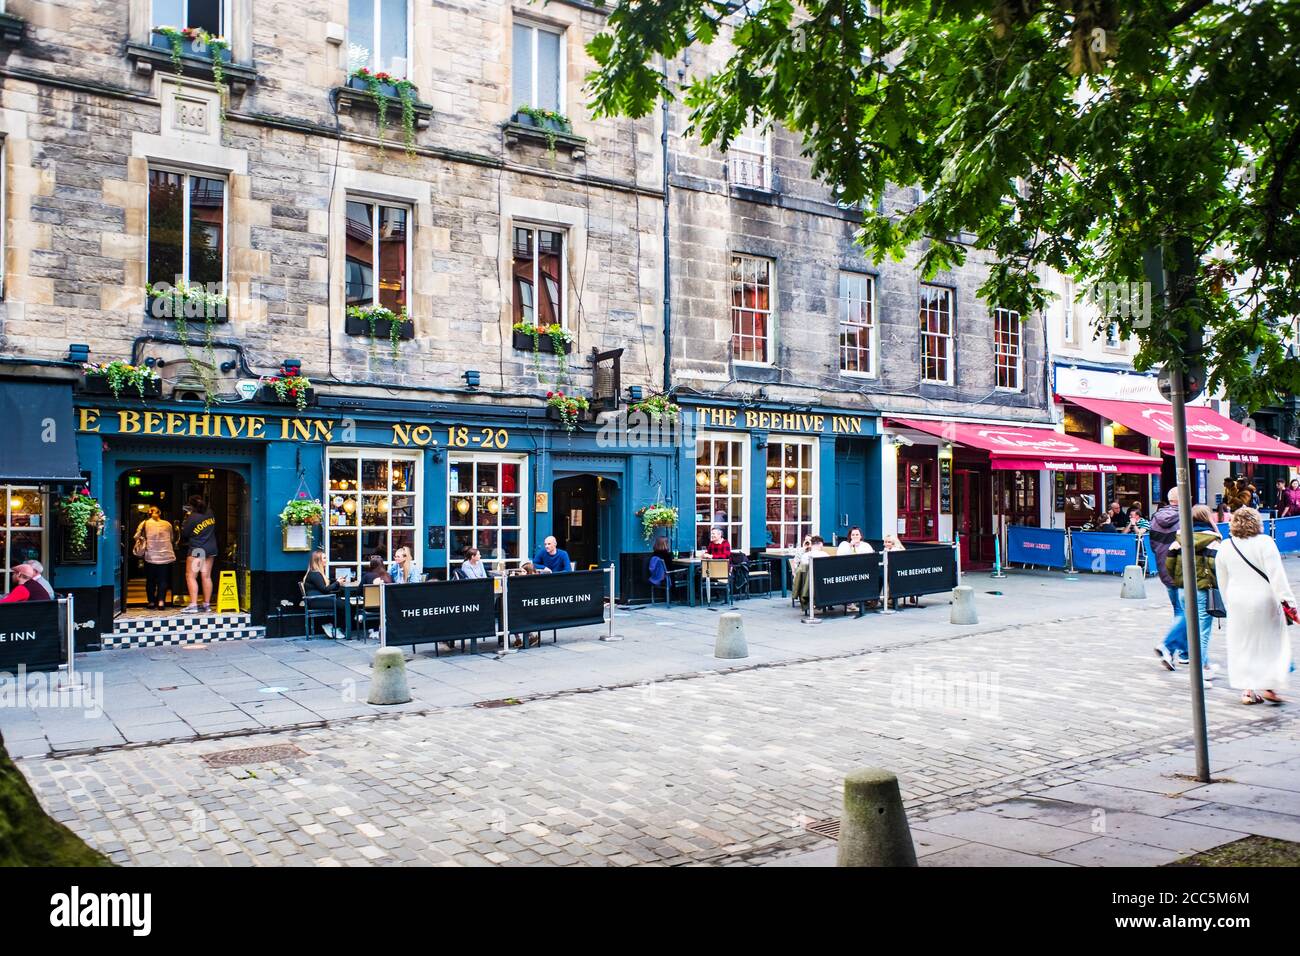 Edinburgh Scotland 6th Aug 2020 the Beehive Inn at Grassmarket in the old town. Former place of public execution. People sitting and drinking outside Stock Photo